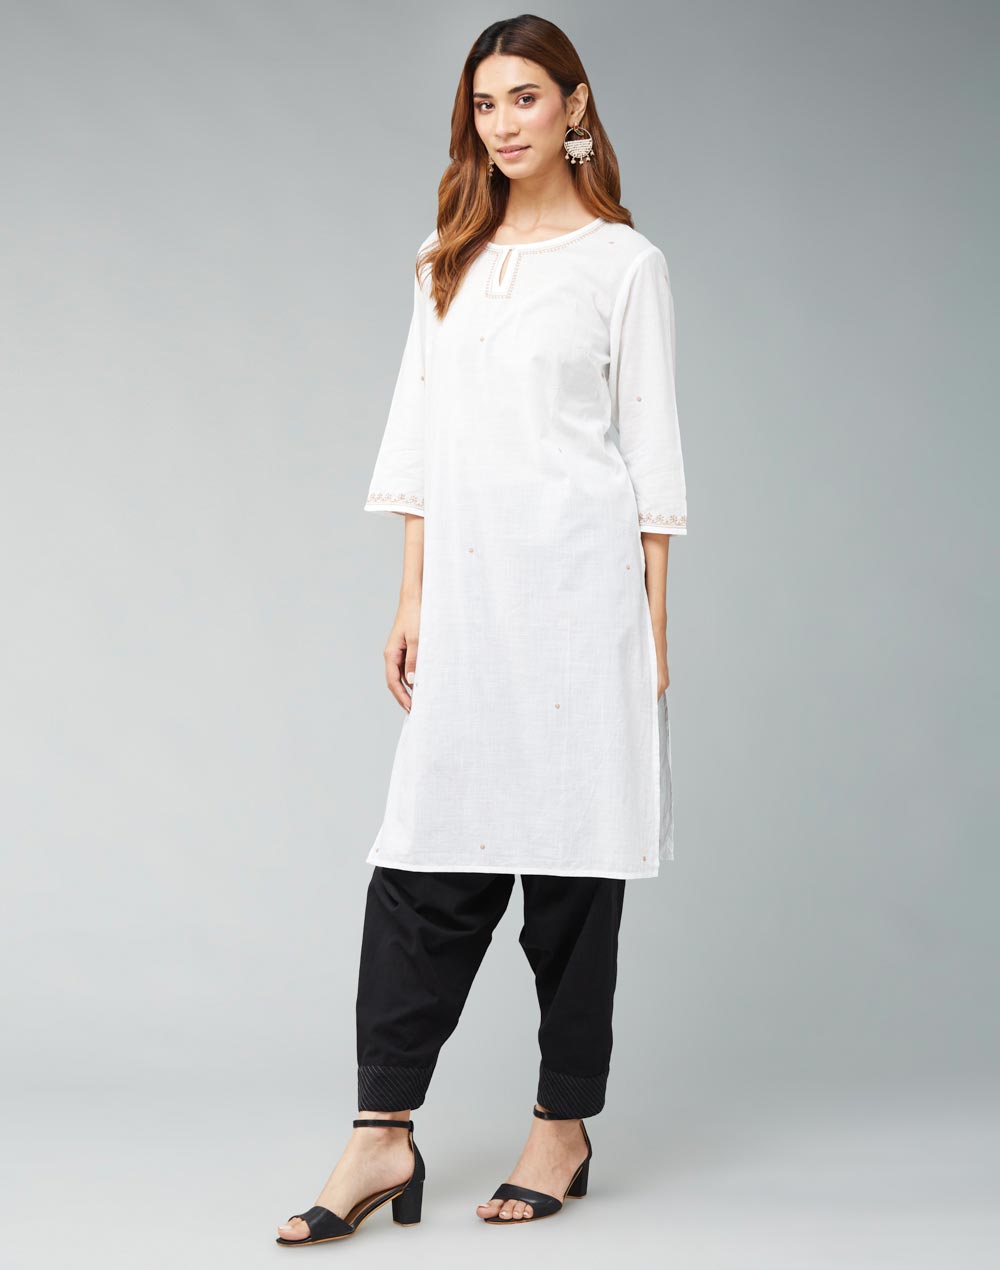 Buy Offwhite Cotton Embroidered Knee Length Kurta for Women Online at ...